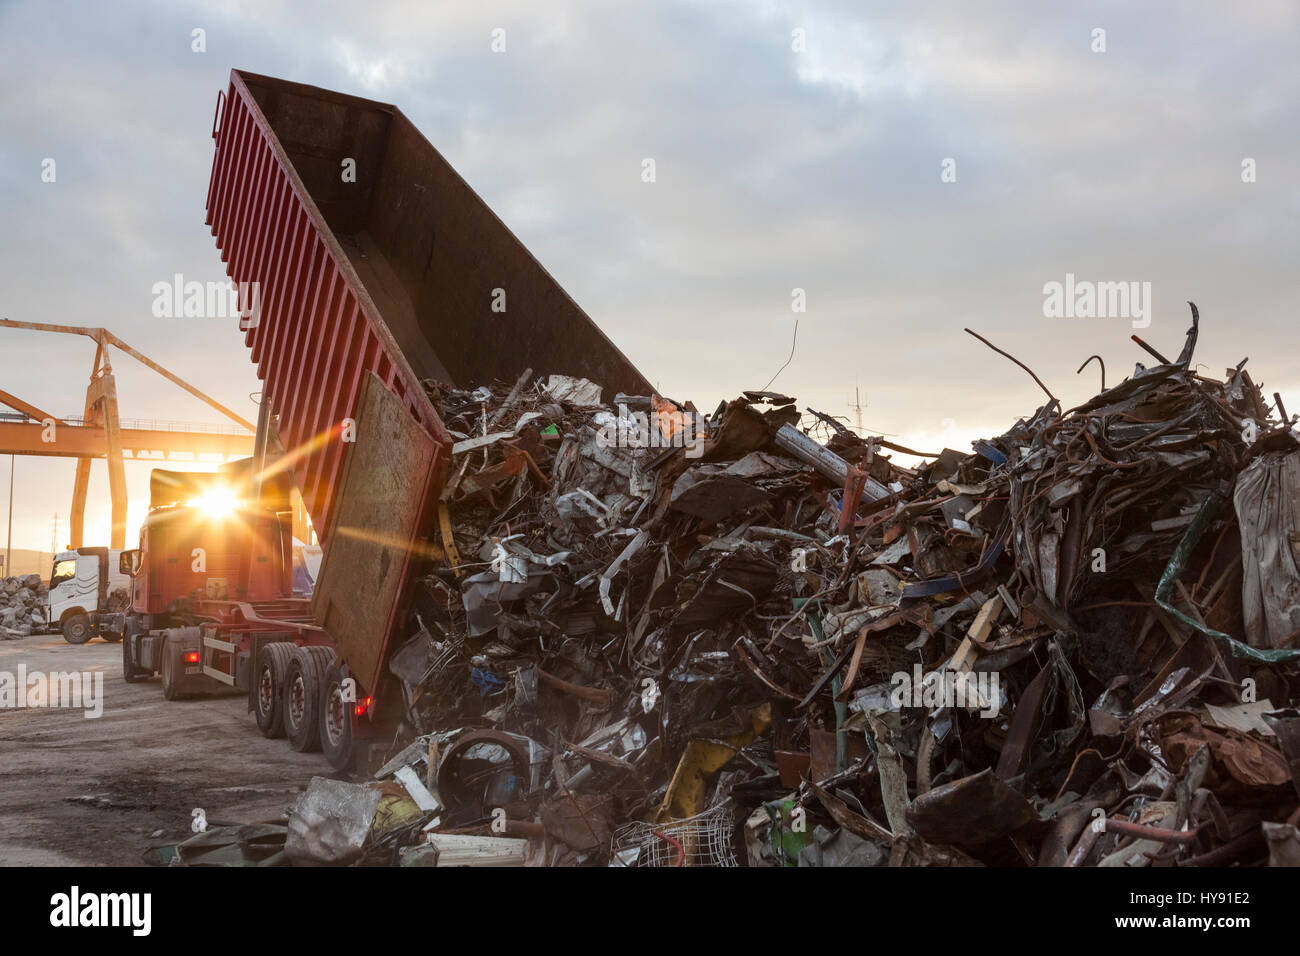 A truck unloads its cargo of scrap metal prior to shipment to a recycling facility Stock Photo